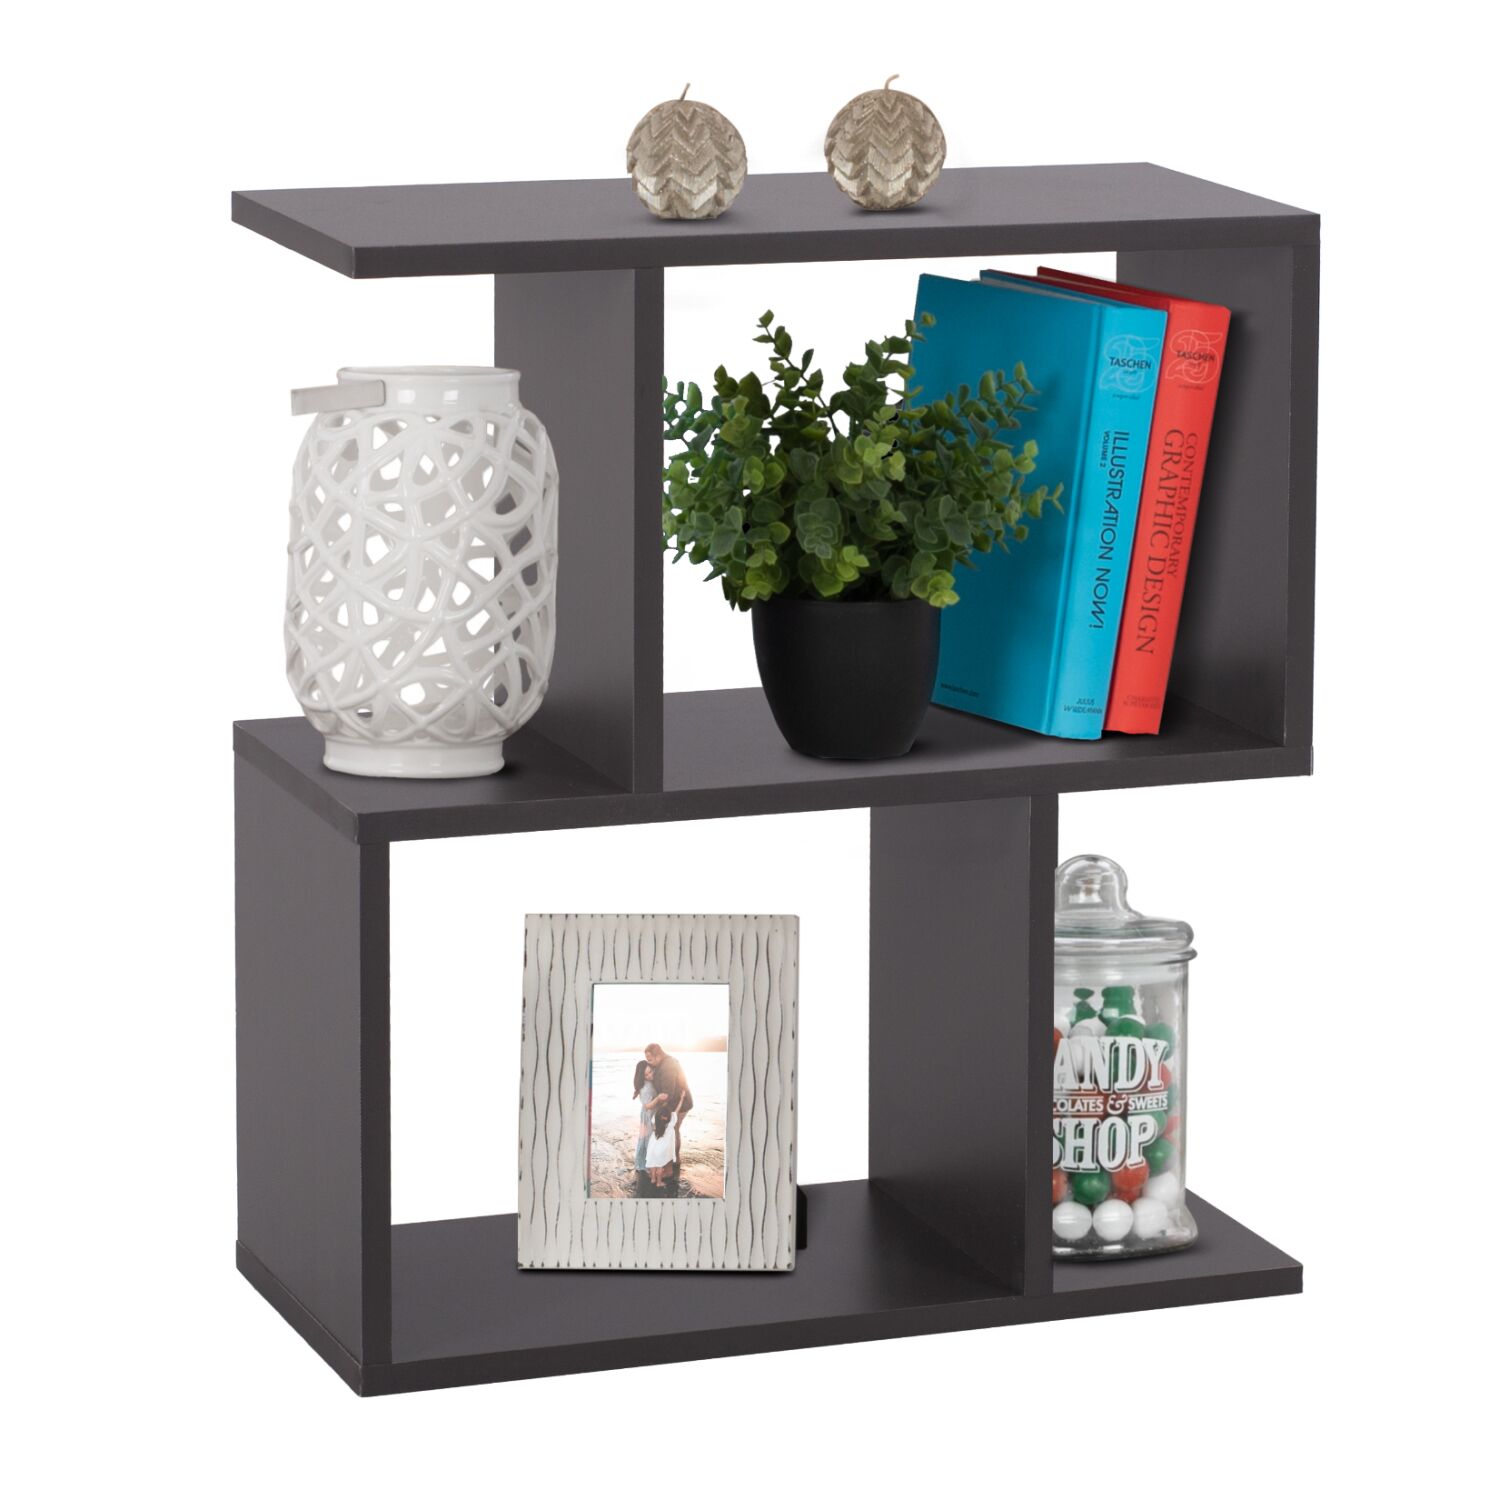 SIDE TABLE AMEER WITH STORAGE SPACES HM8881.20 MELAMINE IN GREY COLOR 50x17x56Hcm.